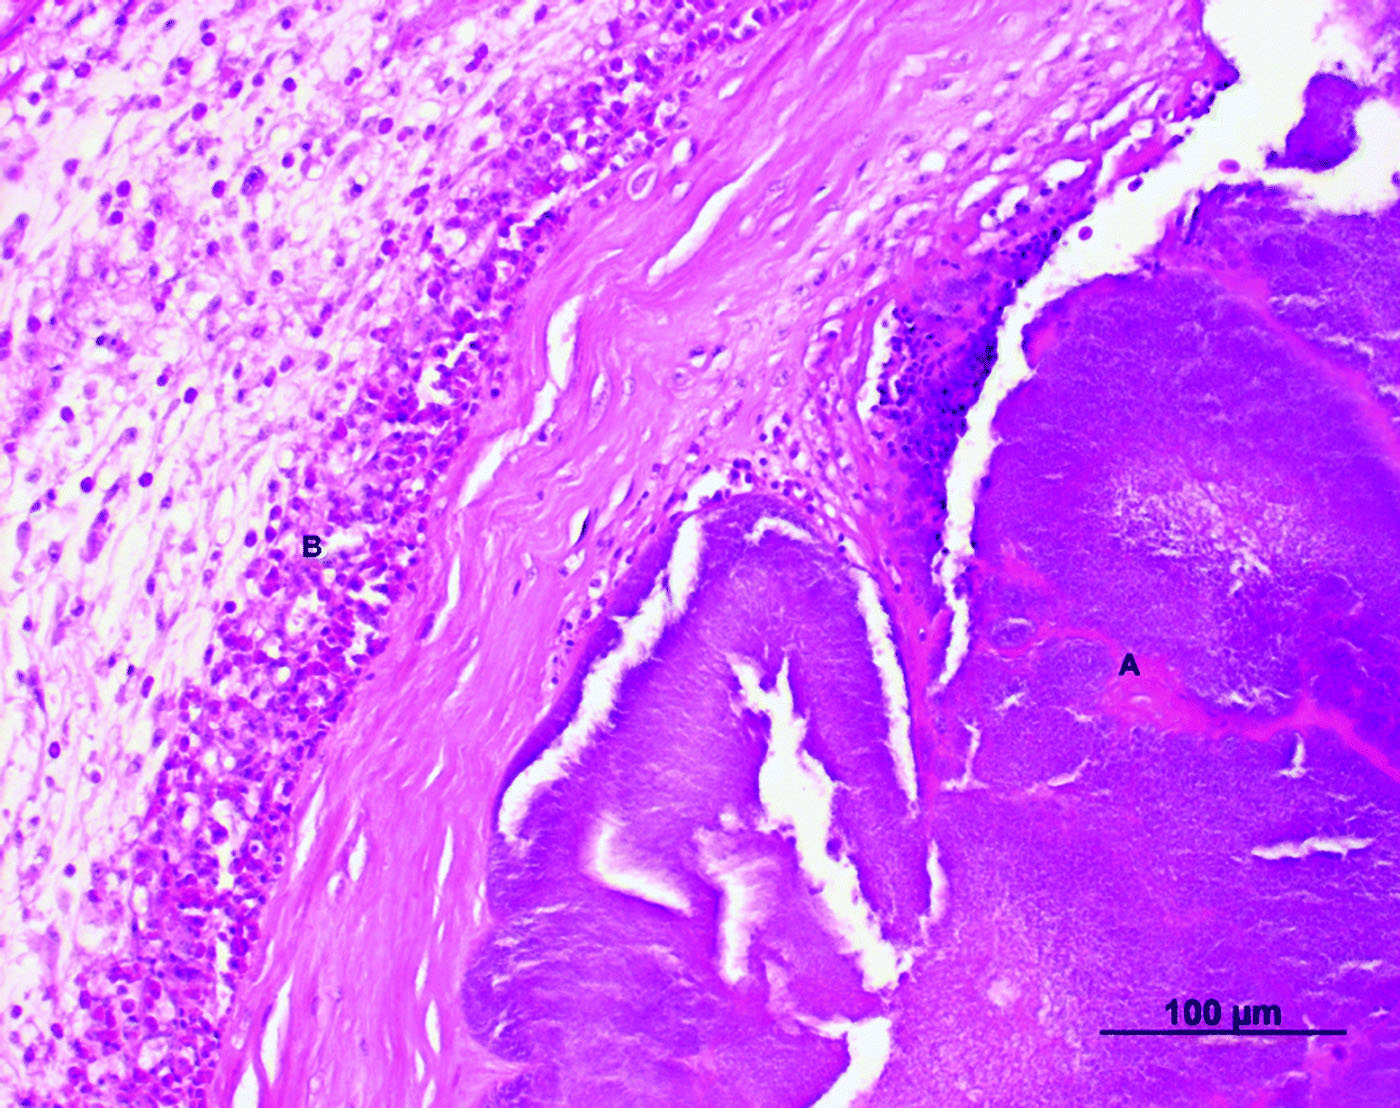 Figure 2.  Cross-section of the valvular region of the right ventricle of an Amazon parrot (A. autumnalis salvini) (haematoxylin and eosin stain). The thickened encocardium showed an inflammatory infiltrate consisting of granulocytic cells (B) and bacterial nests (A)